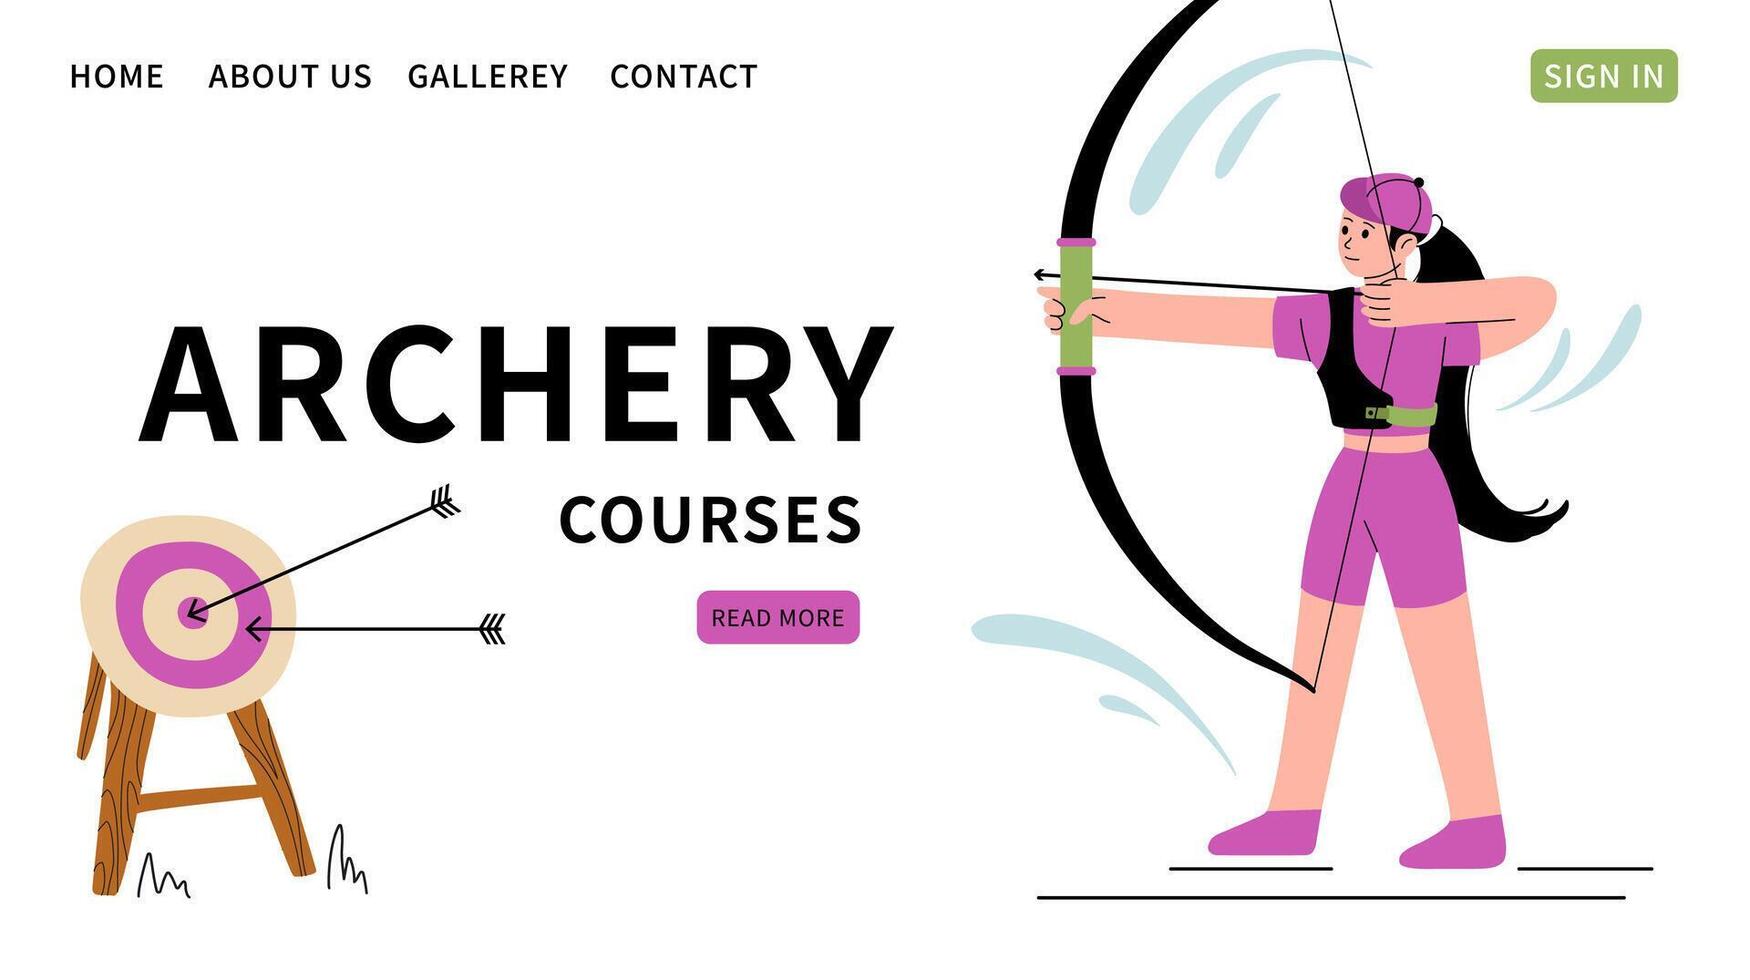 Archery courses website template. Background for sport school for children and adults. Woman shoots bow. Vector flat Illustration of an archer and shooting target. Woman athlete. Text templates.